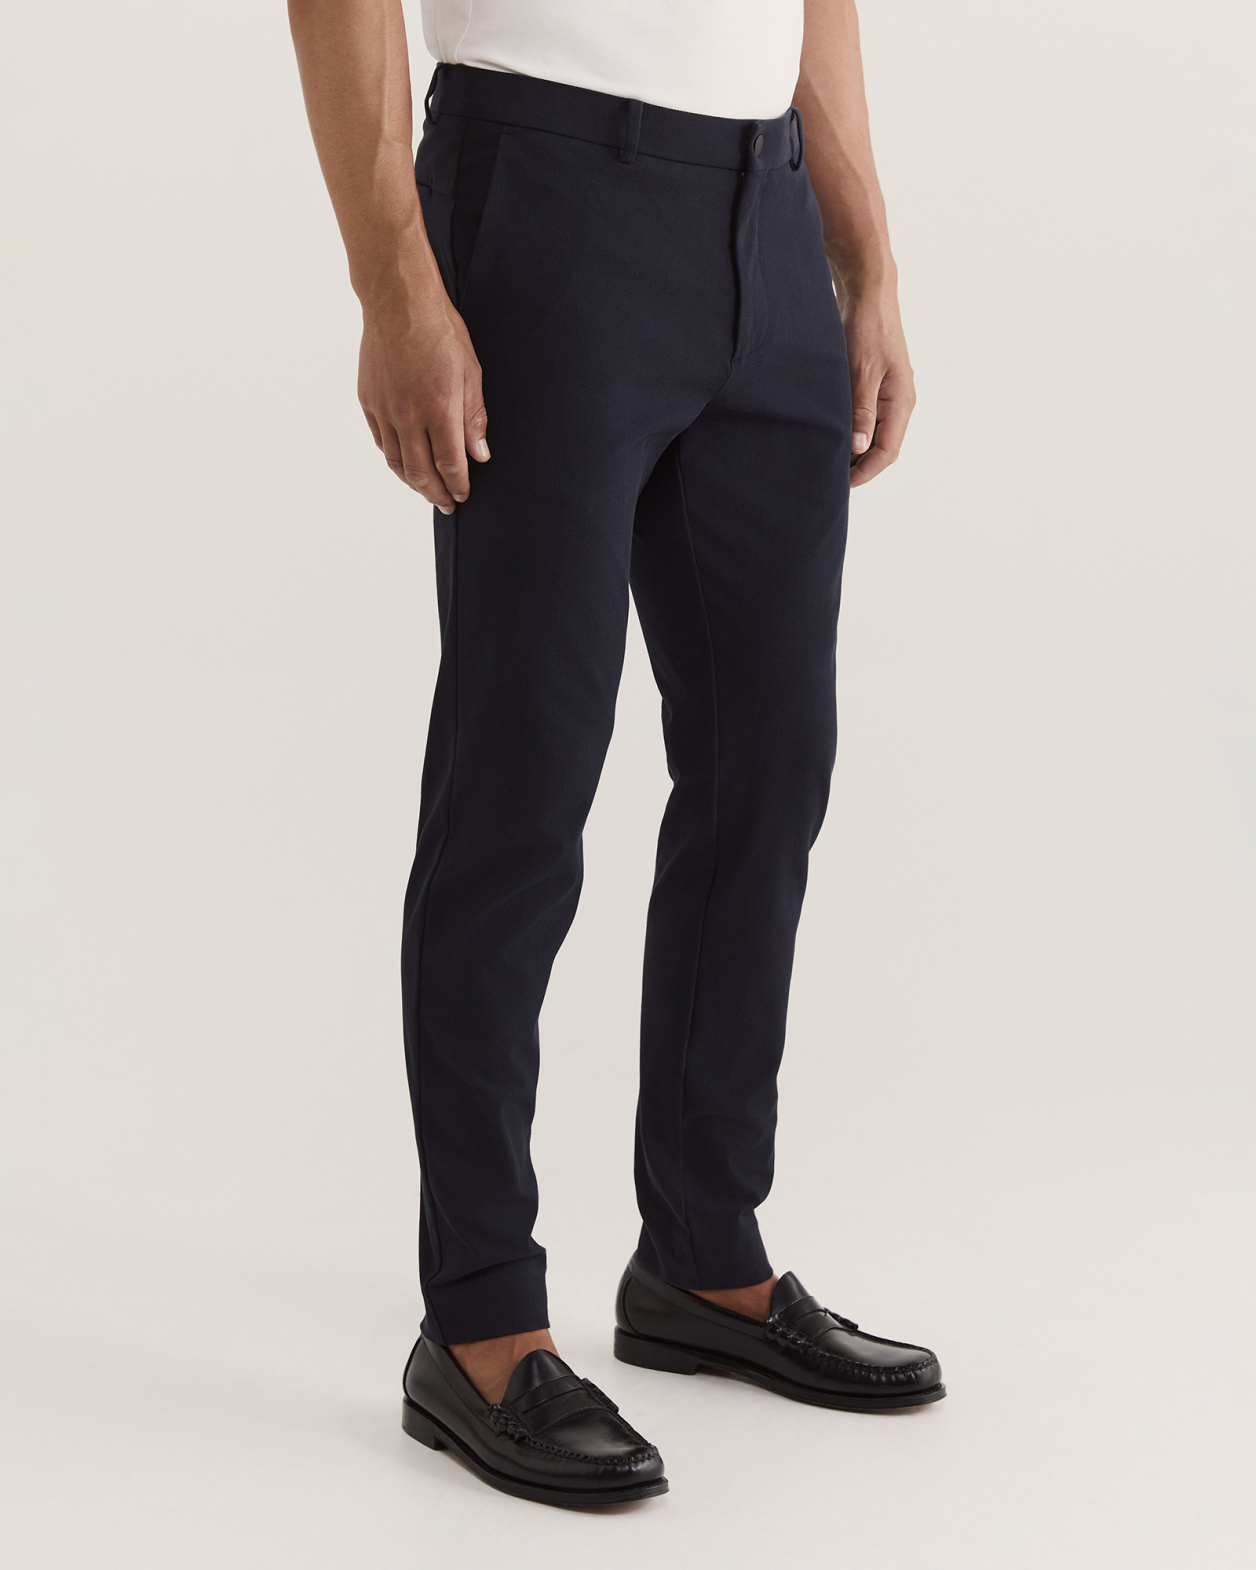 Dillon Textured Chino in NAVY